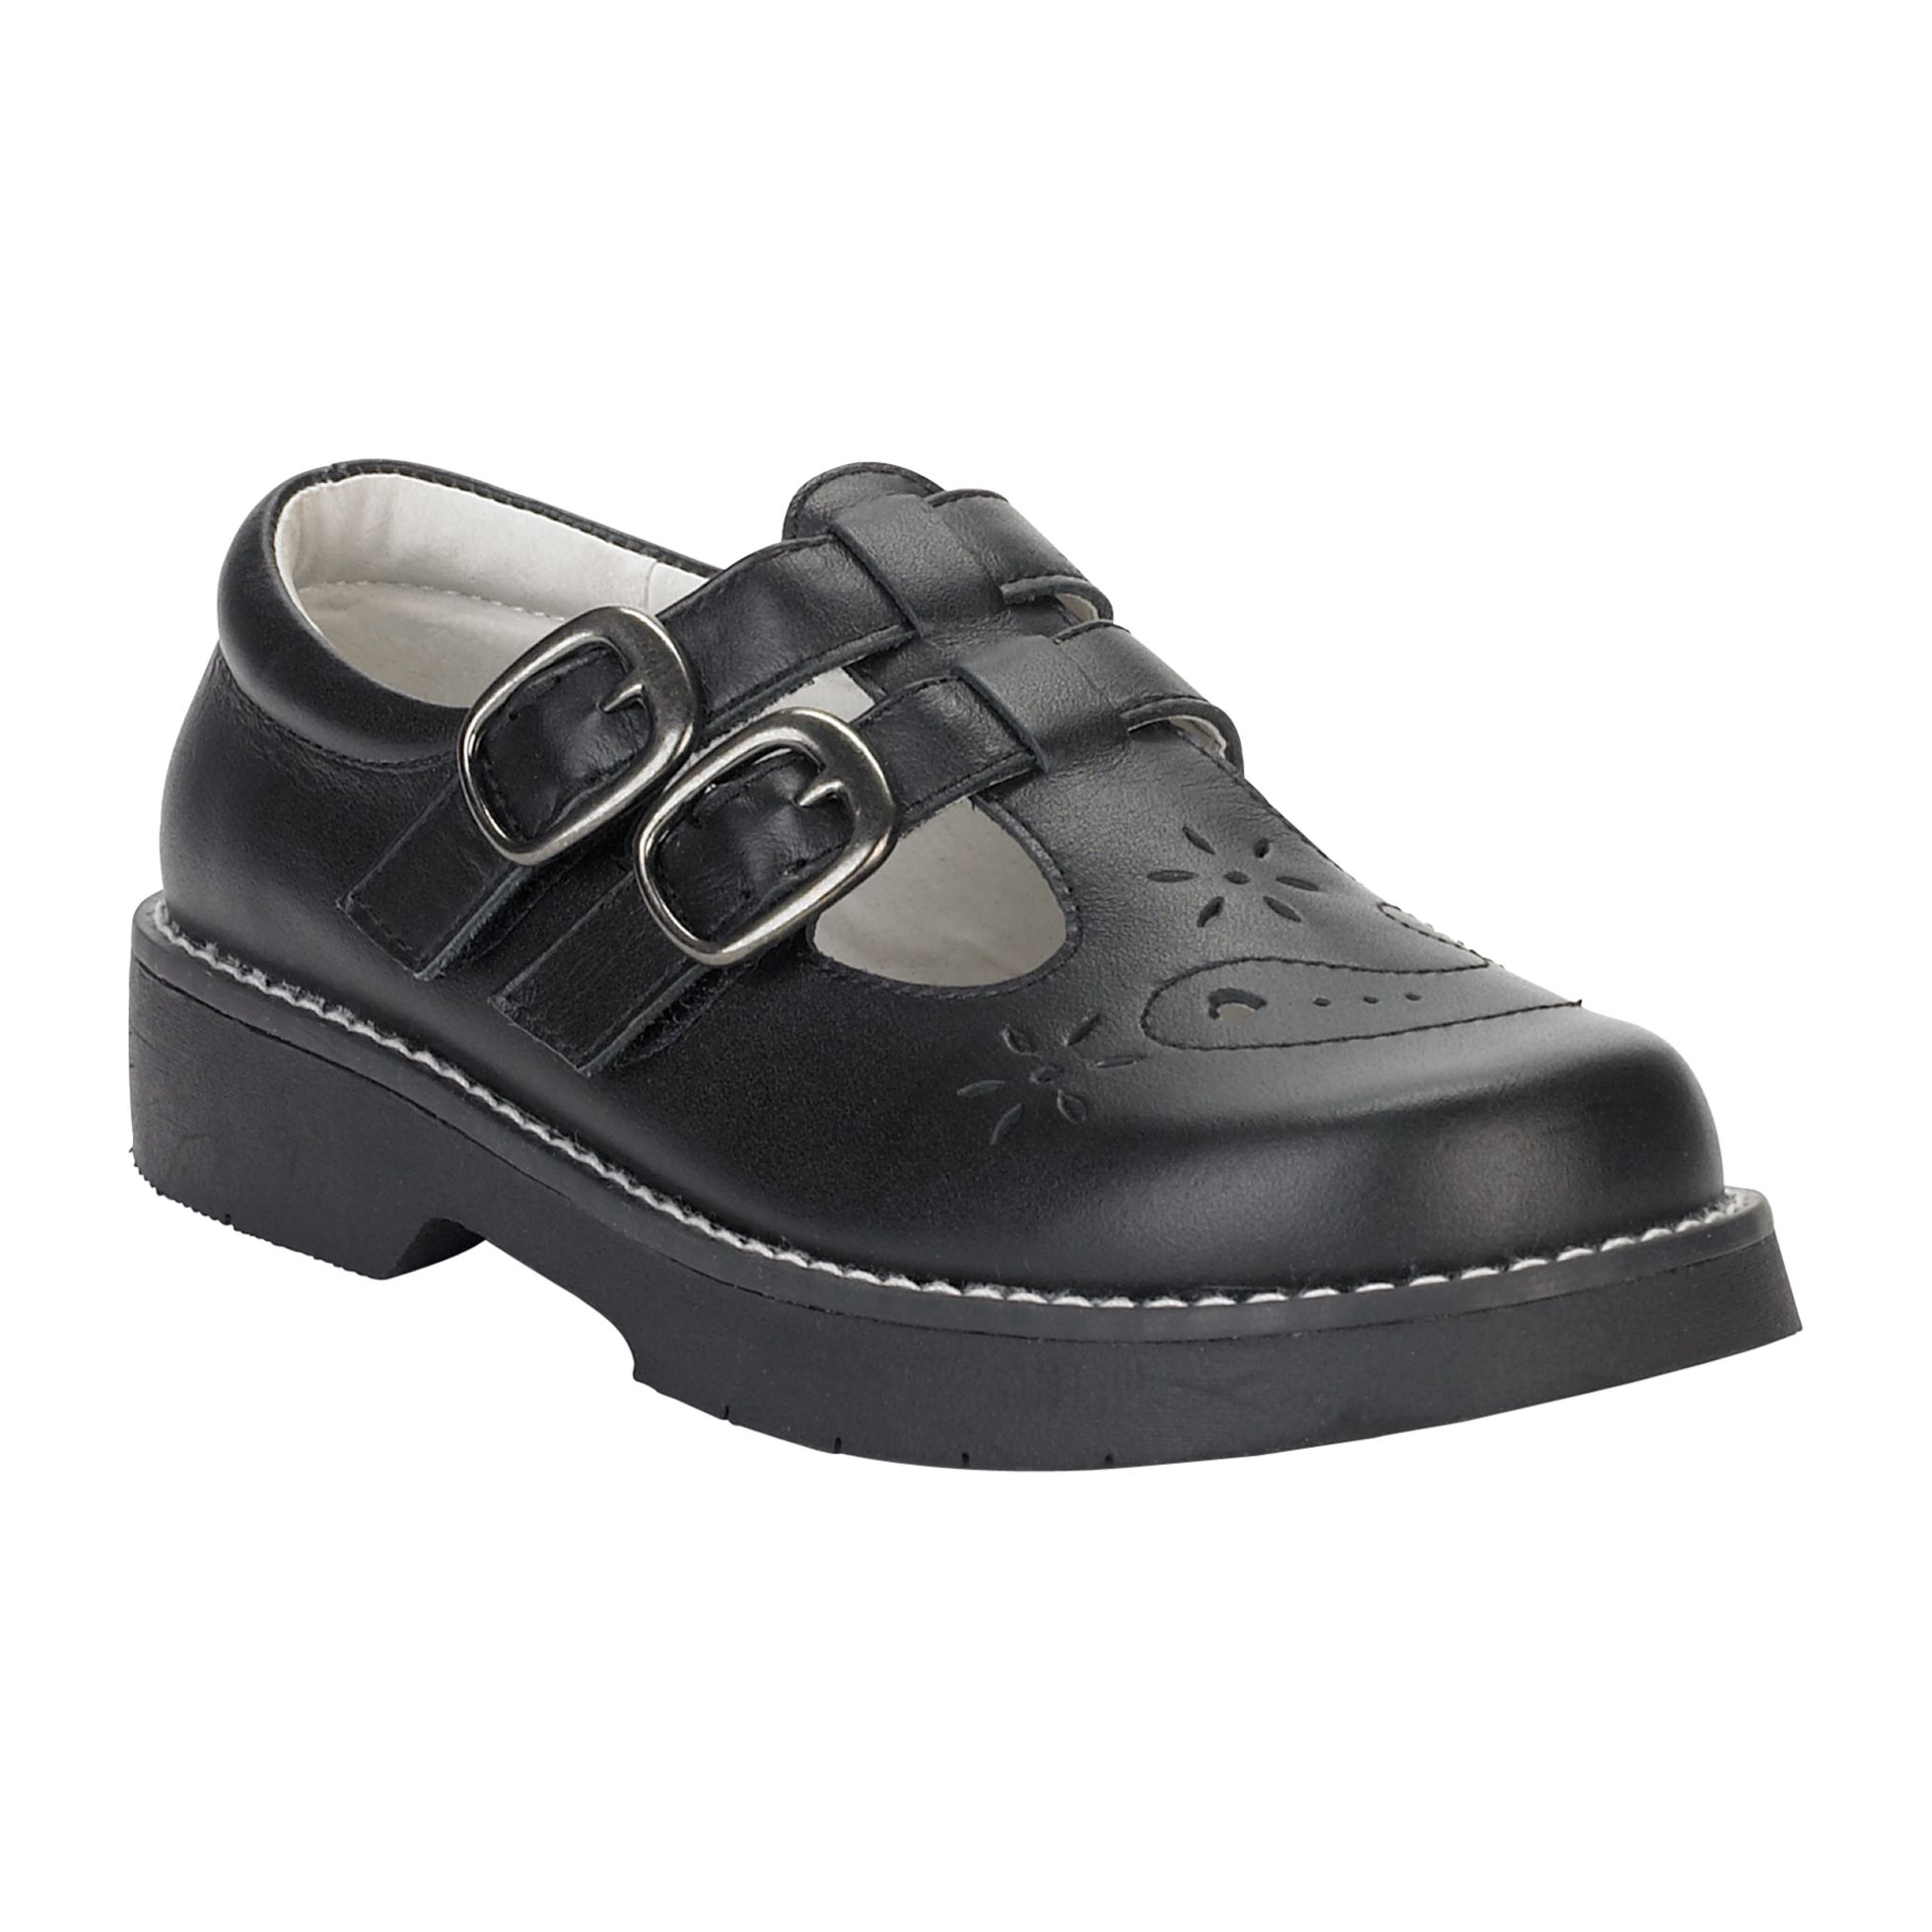 Thom McAn Toddler Girl's Abbey Leather Shoe - Black